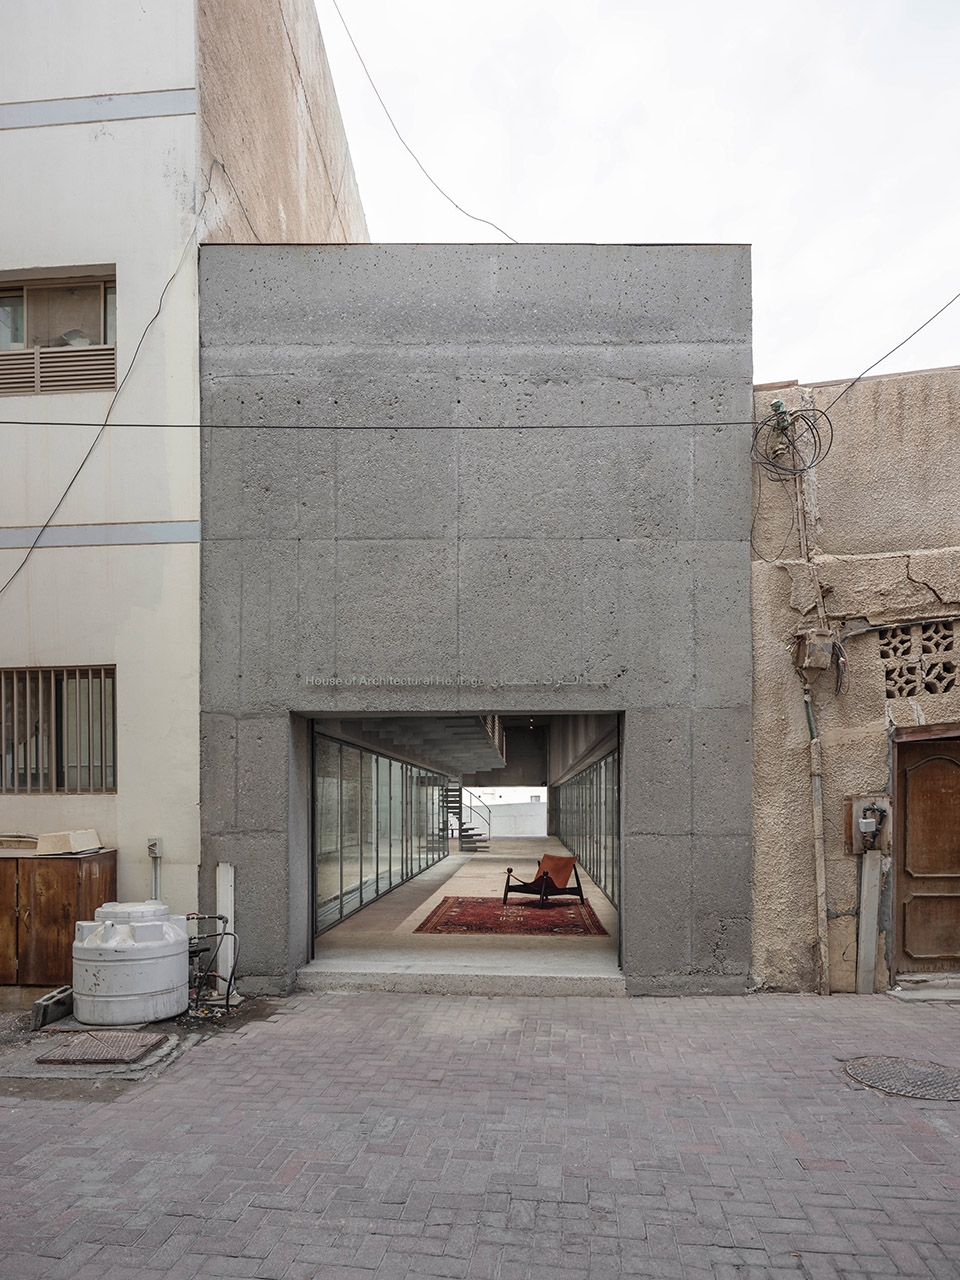 003-house-of-architectural-heritage-by-noura-al-sayeh-leopold-banchini-architects-960x1280.jpg